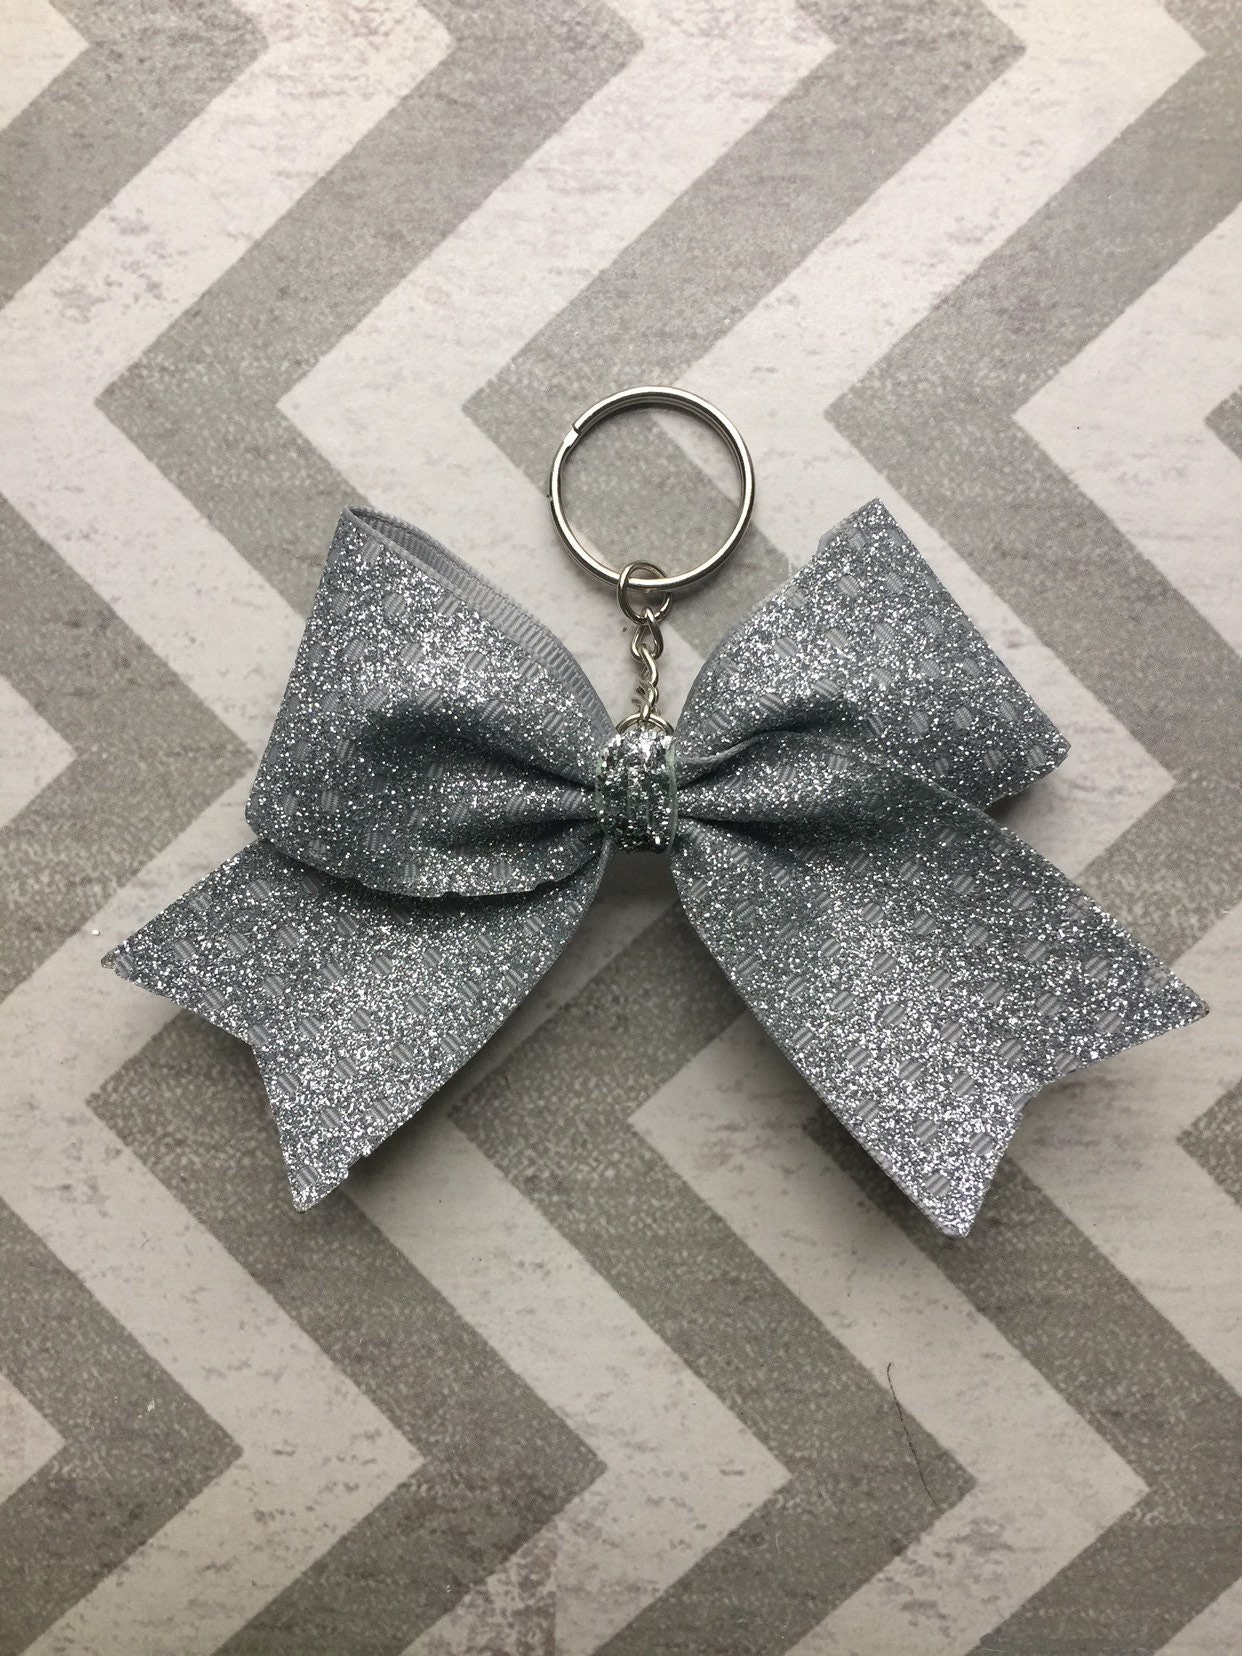 Cheer Bows Key Chain,Holographic Backpack Bow Pink Sparkly Bling Cheer Mom